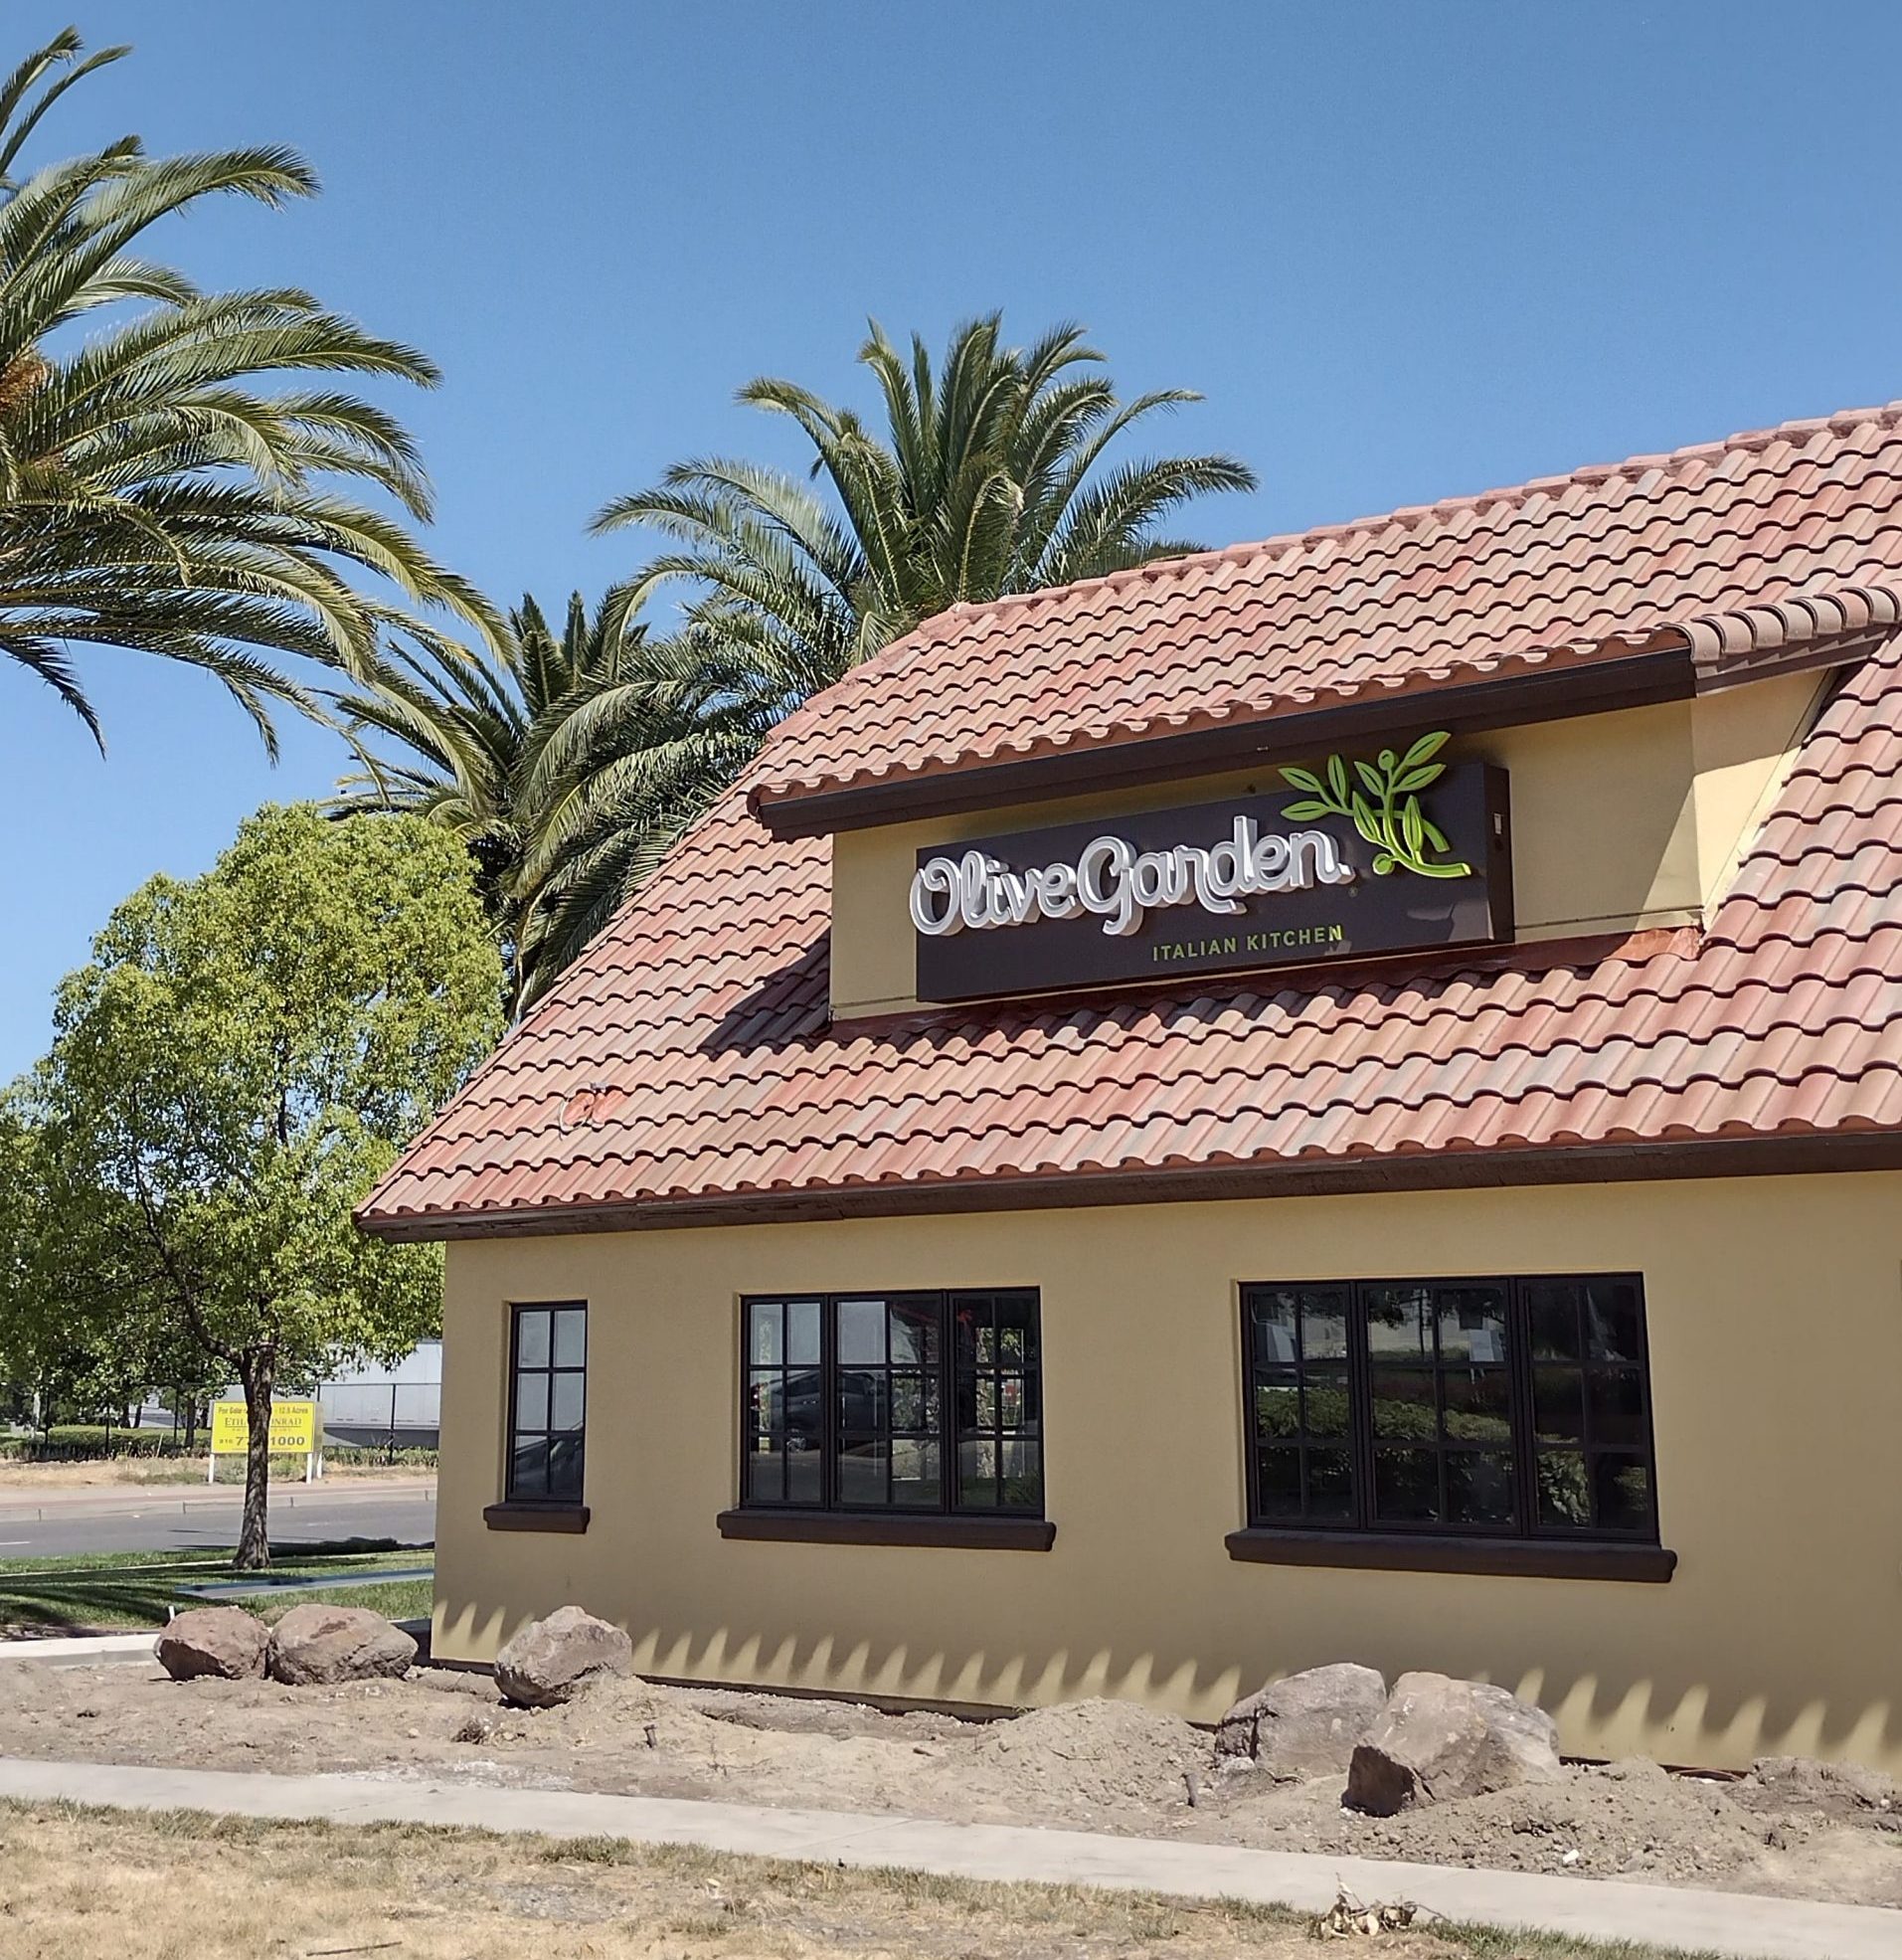 New Olive Garden in Natomas Approved